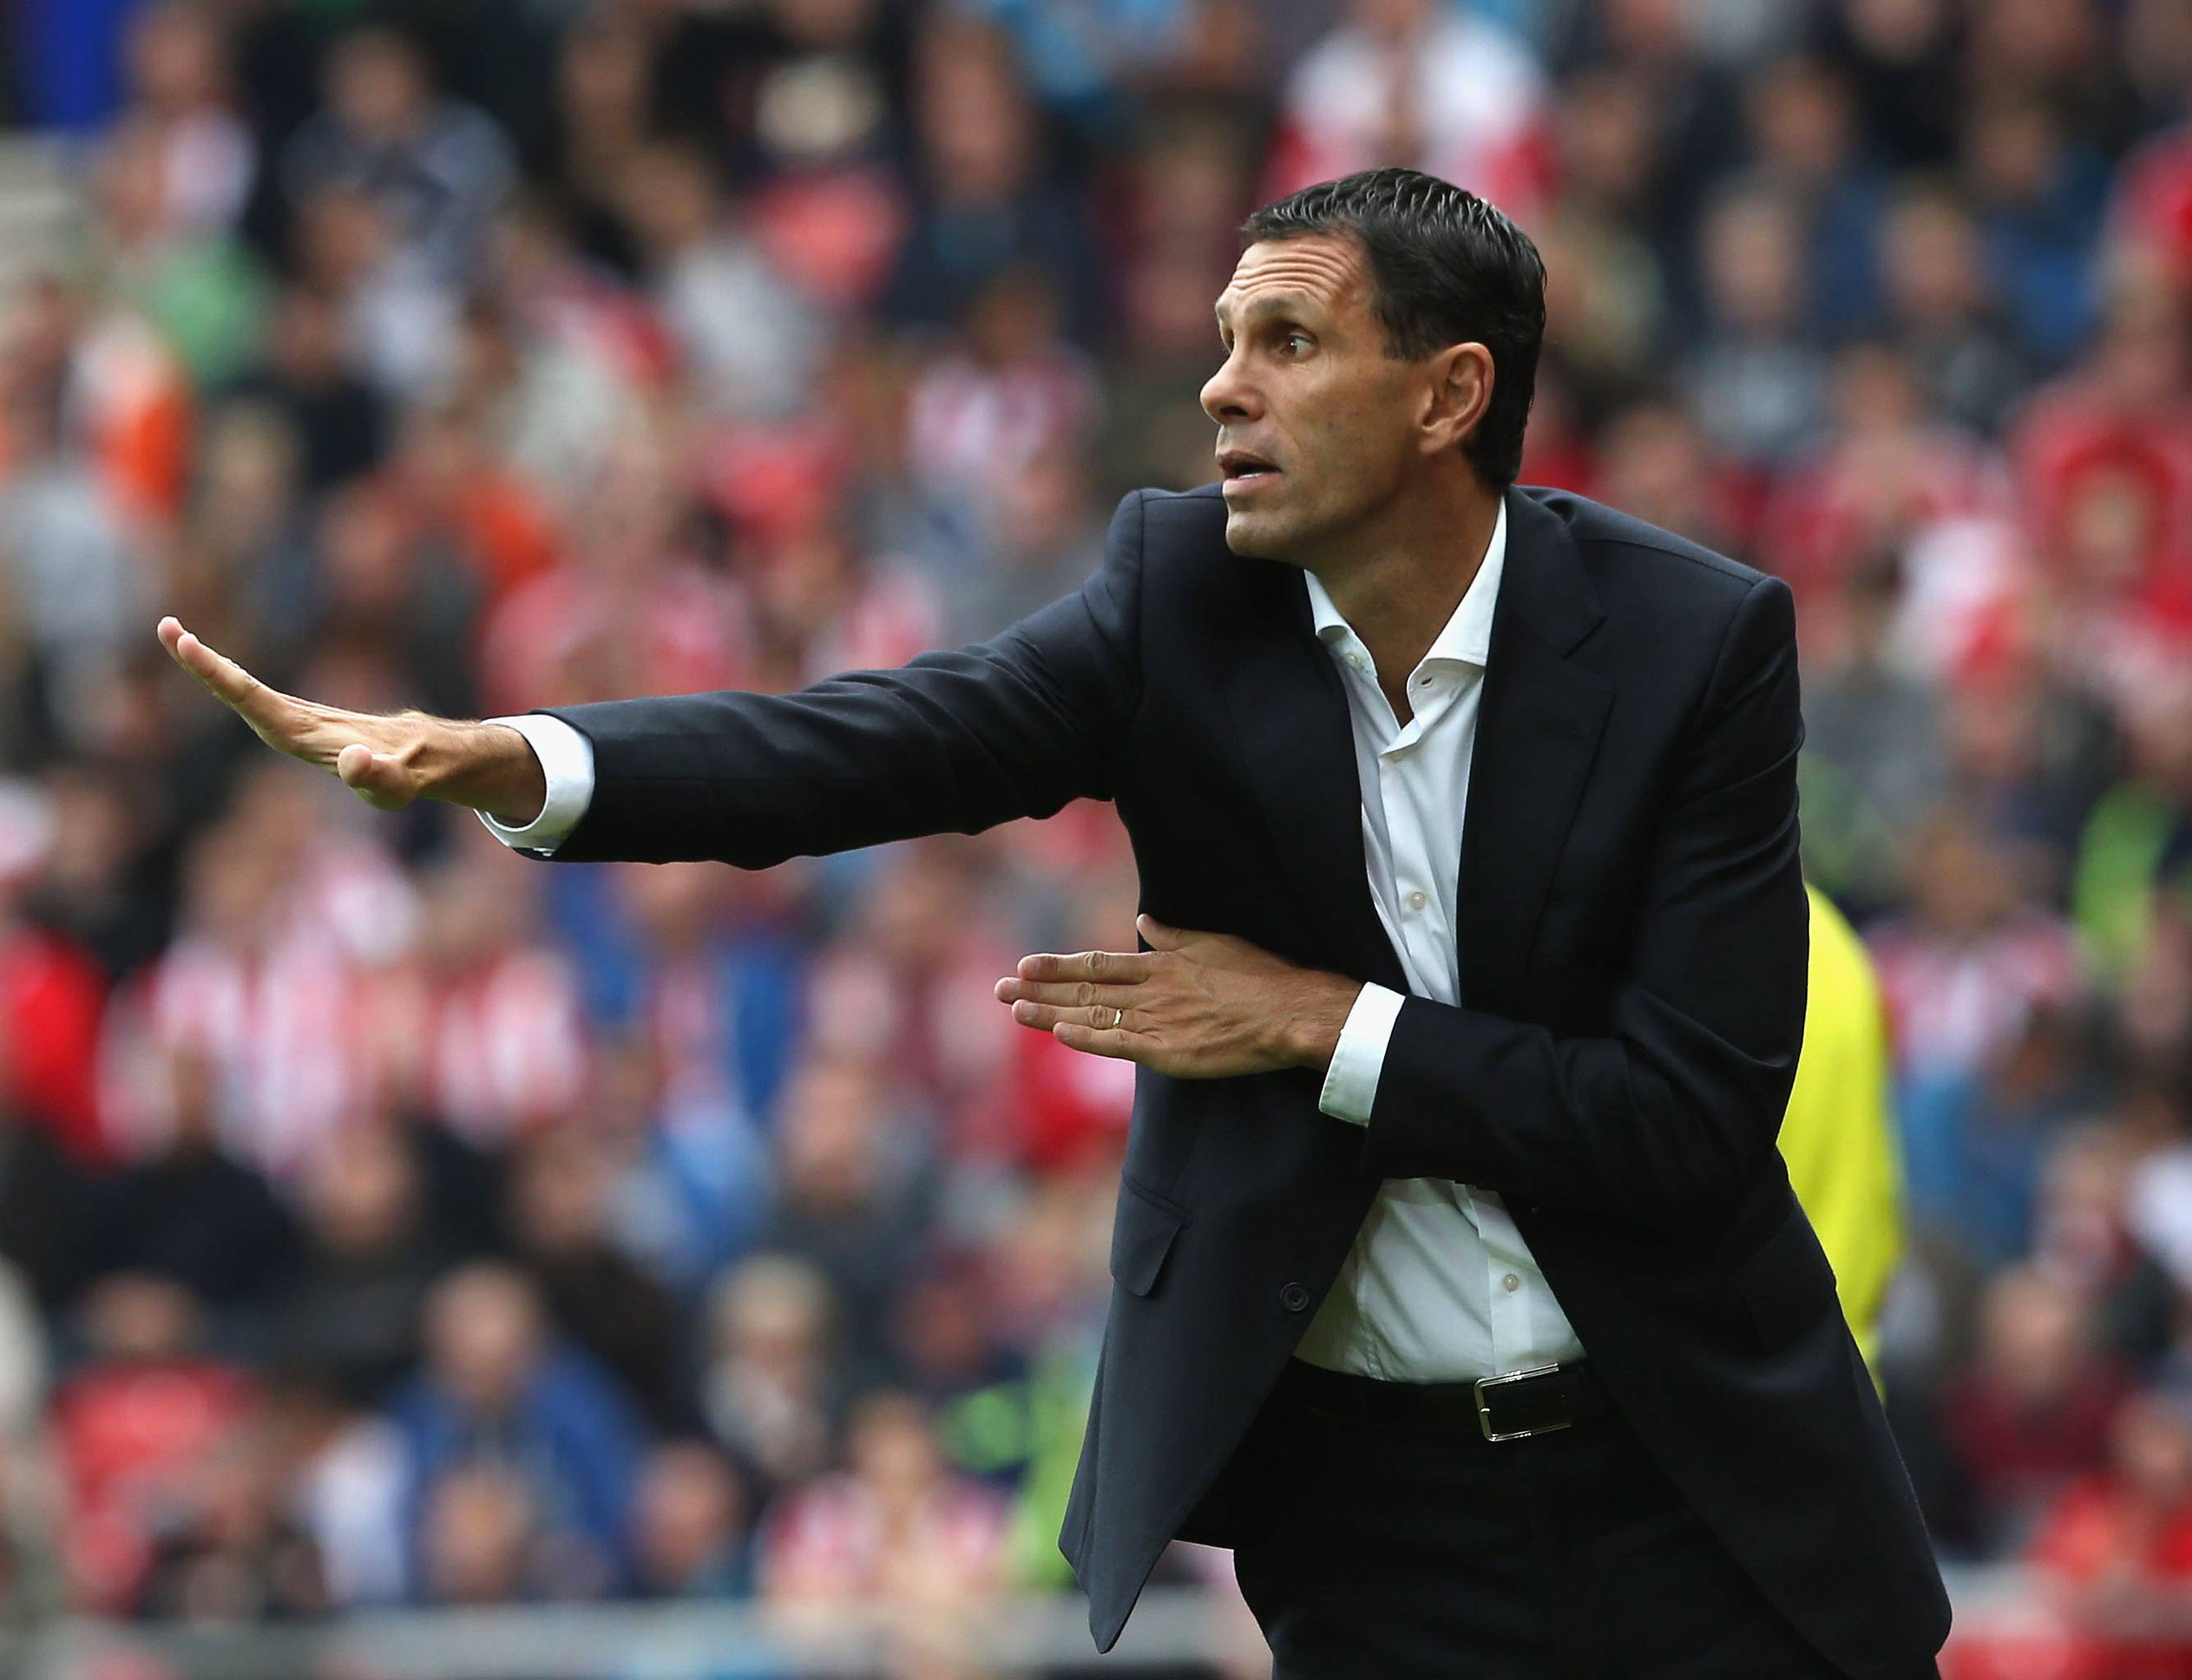 Gus Poyet in danger of losing job at Shanghai Shenhua after just one match